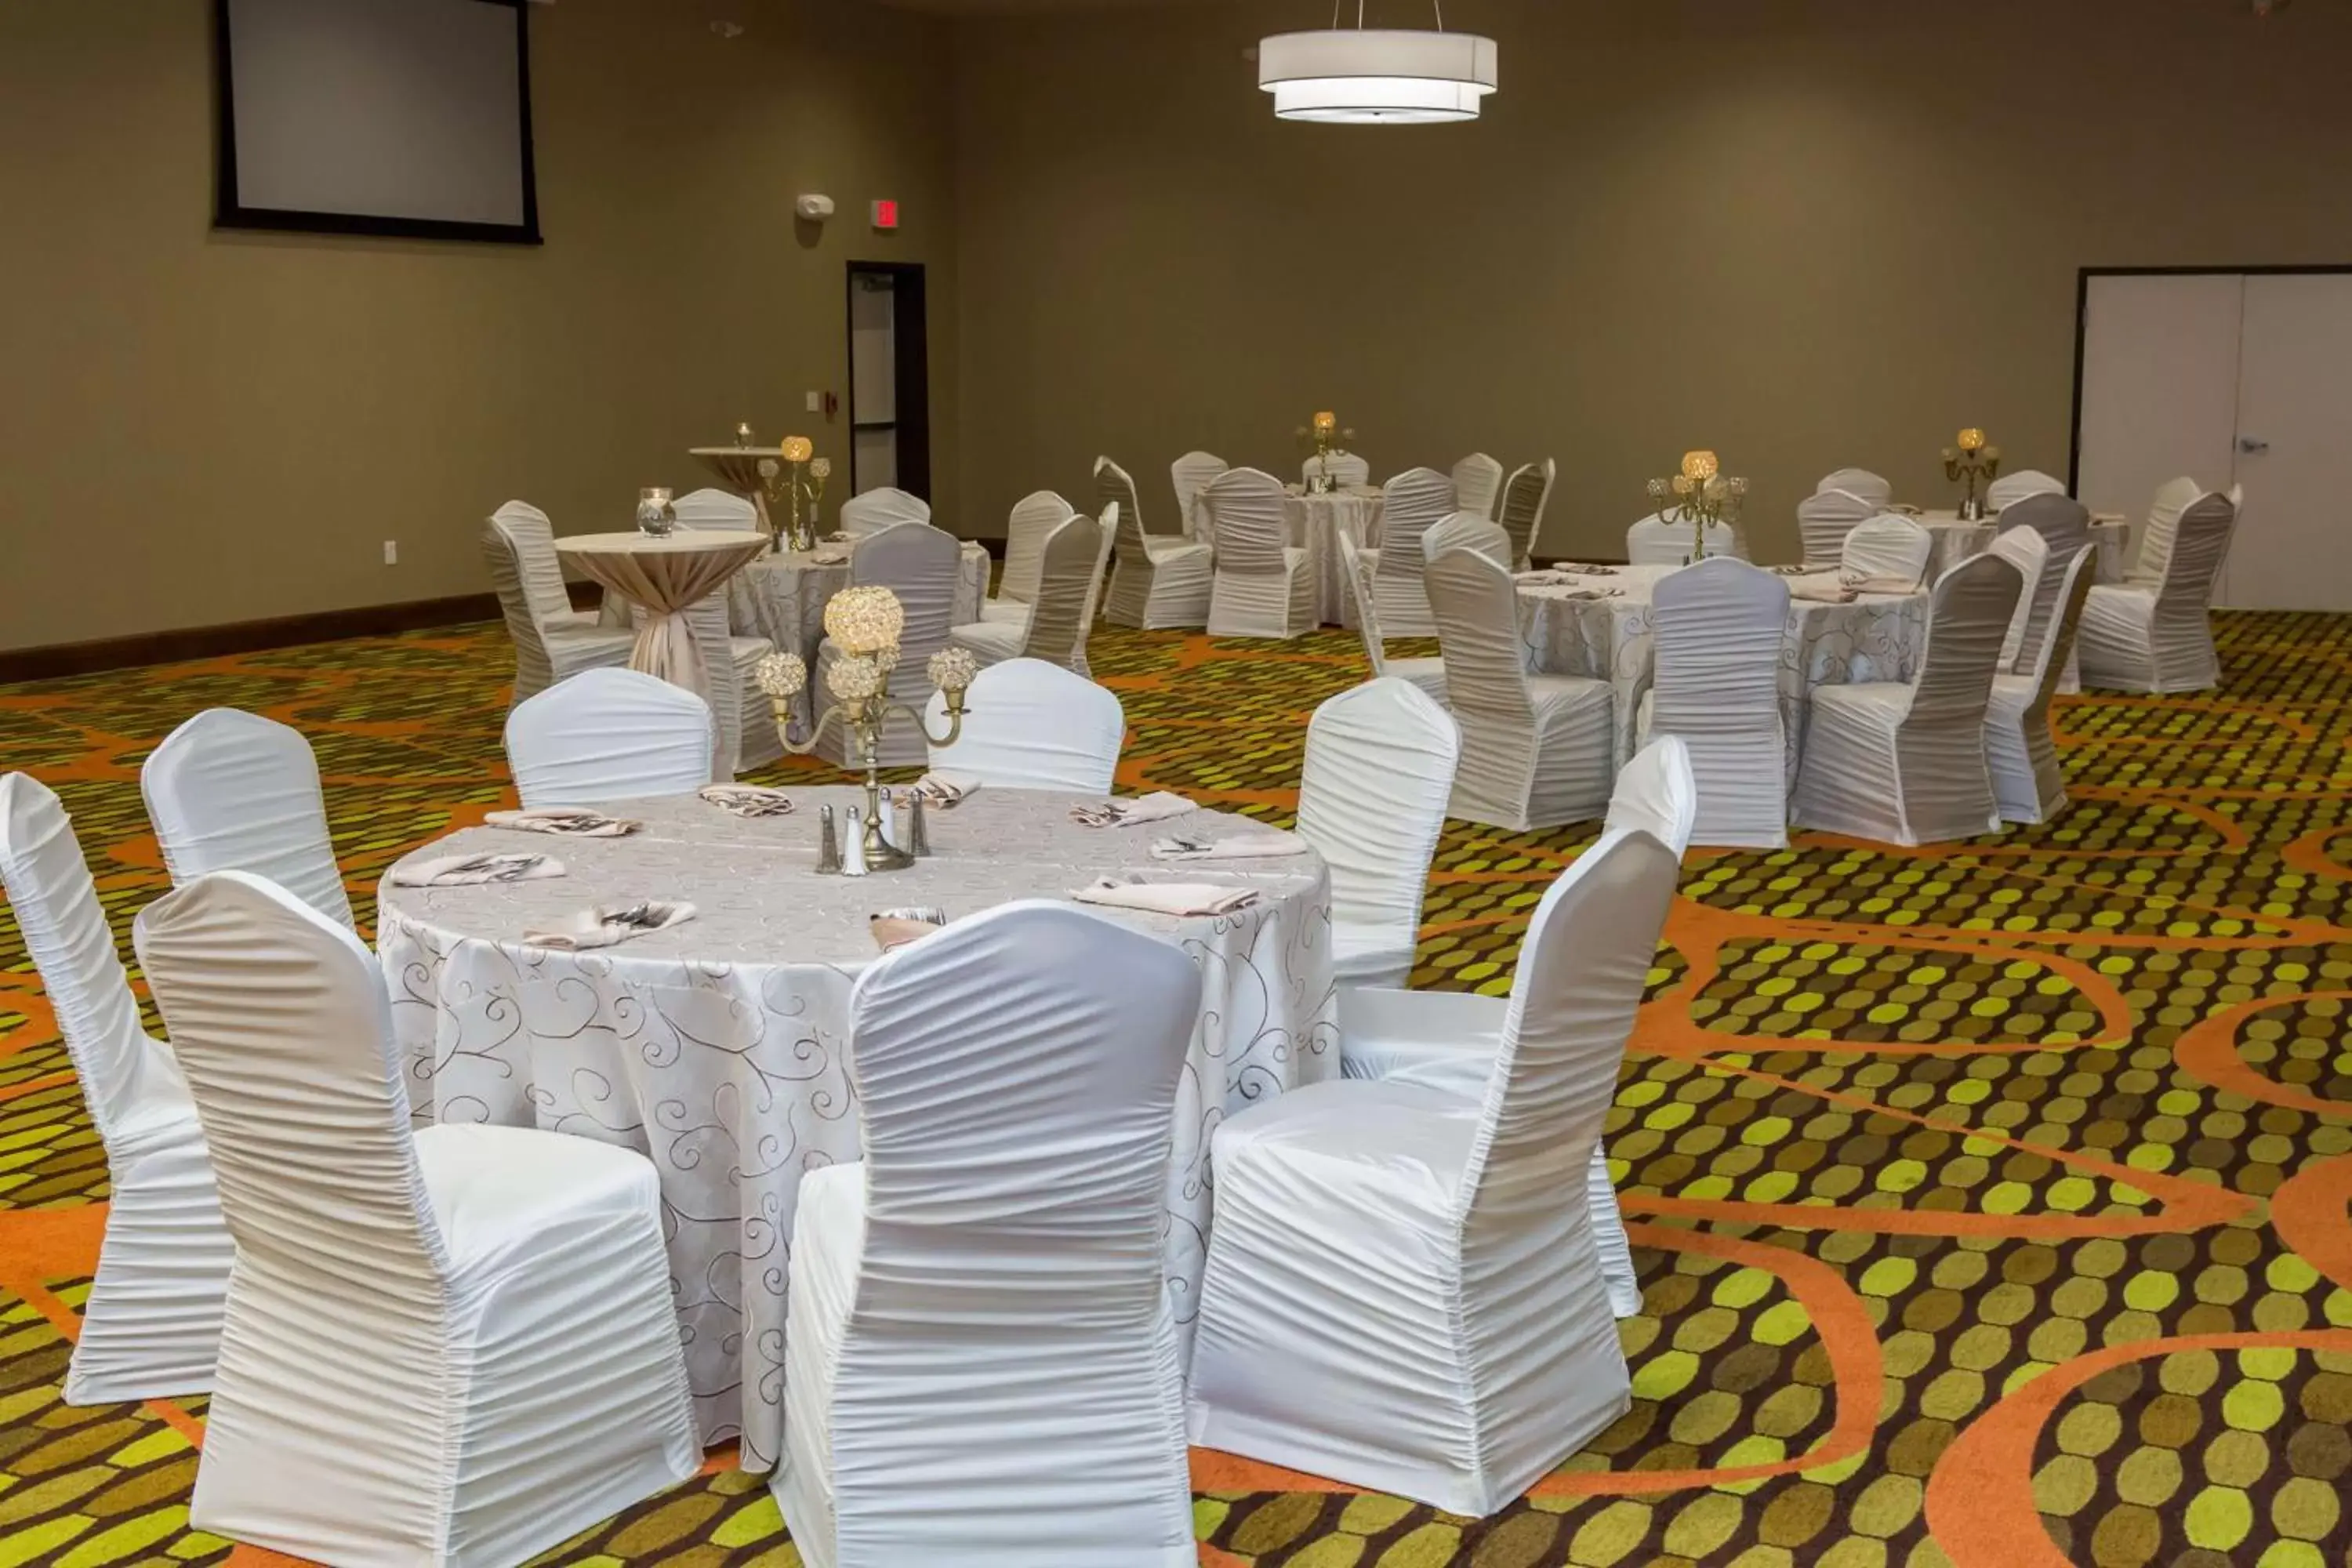 Meeting/conference room, Banquet Facilities in Hilton Garden Inn West Chester